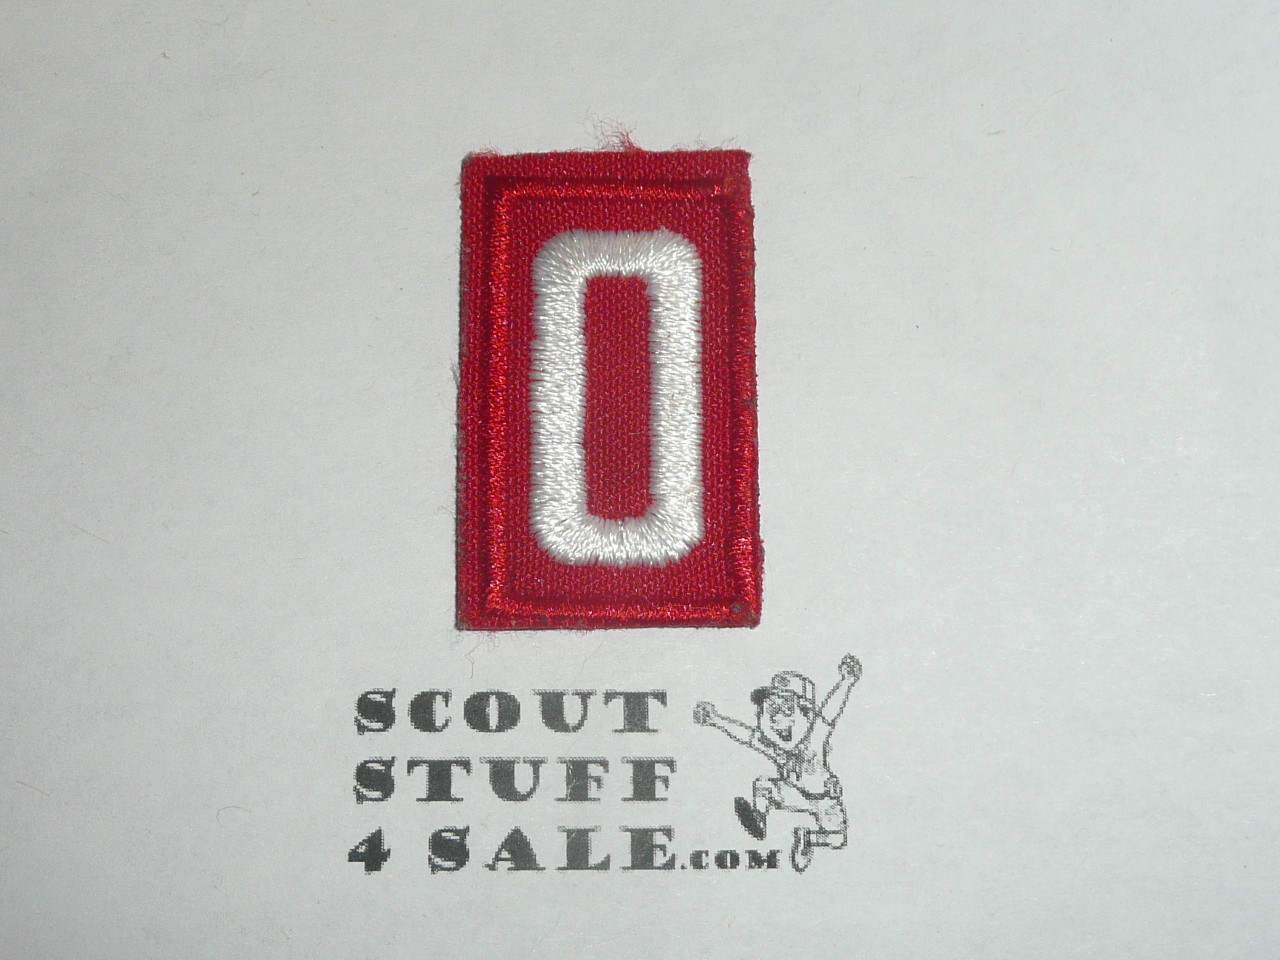 Old Red Troop Numeral "0", twill